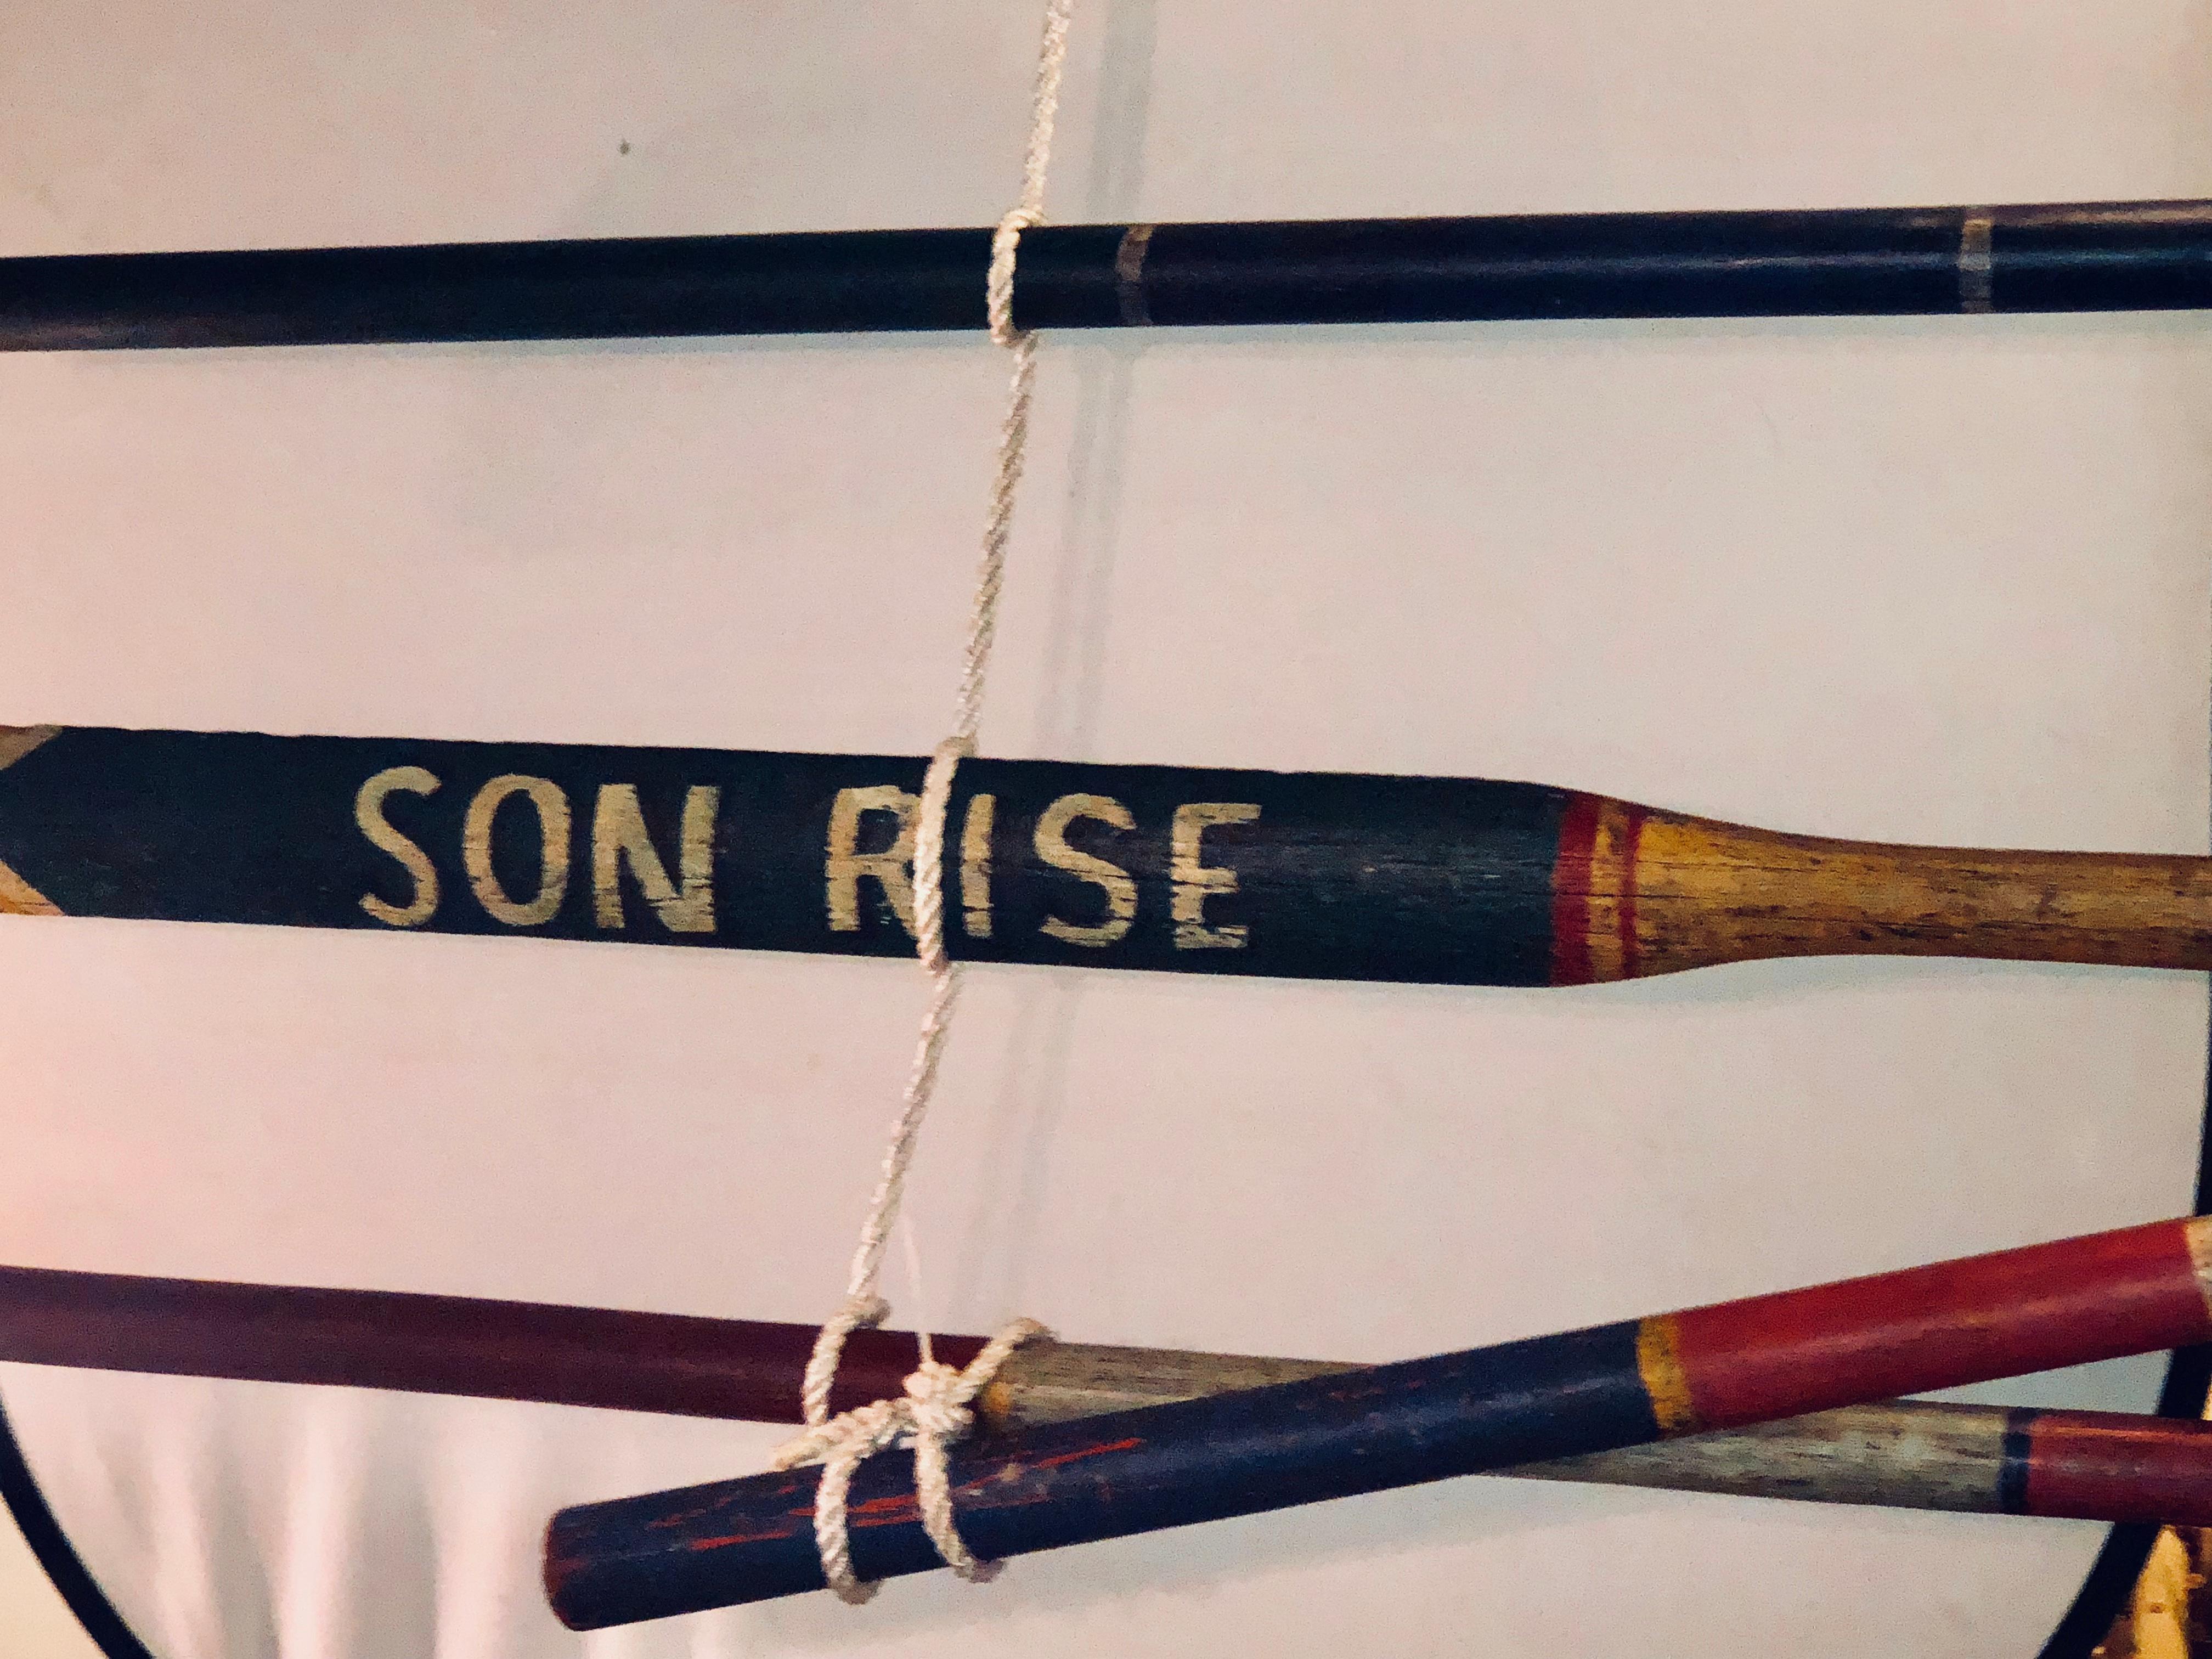 Set of 8 Hand-Painted Inspirational Rowing Oars or Paddles Priced Individually 8